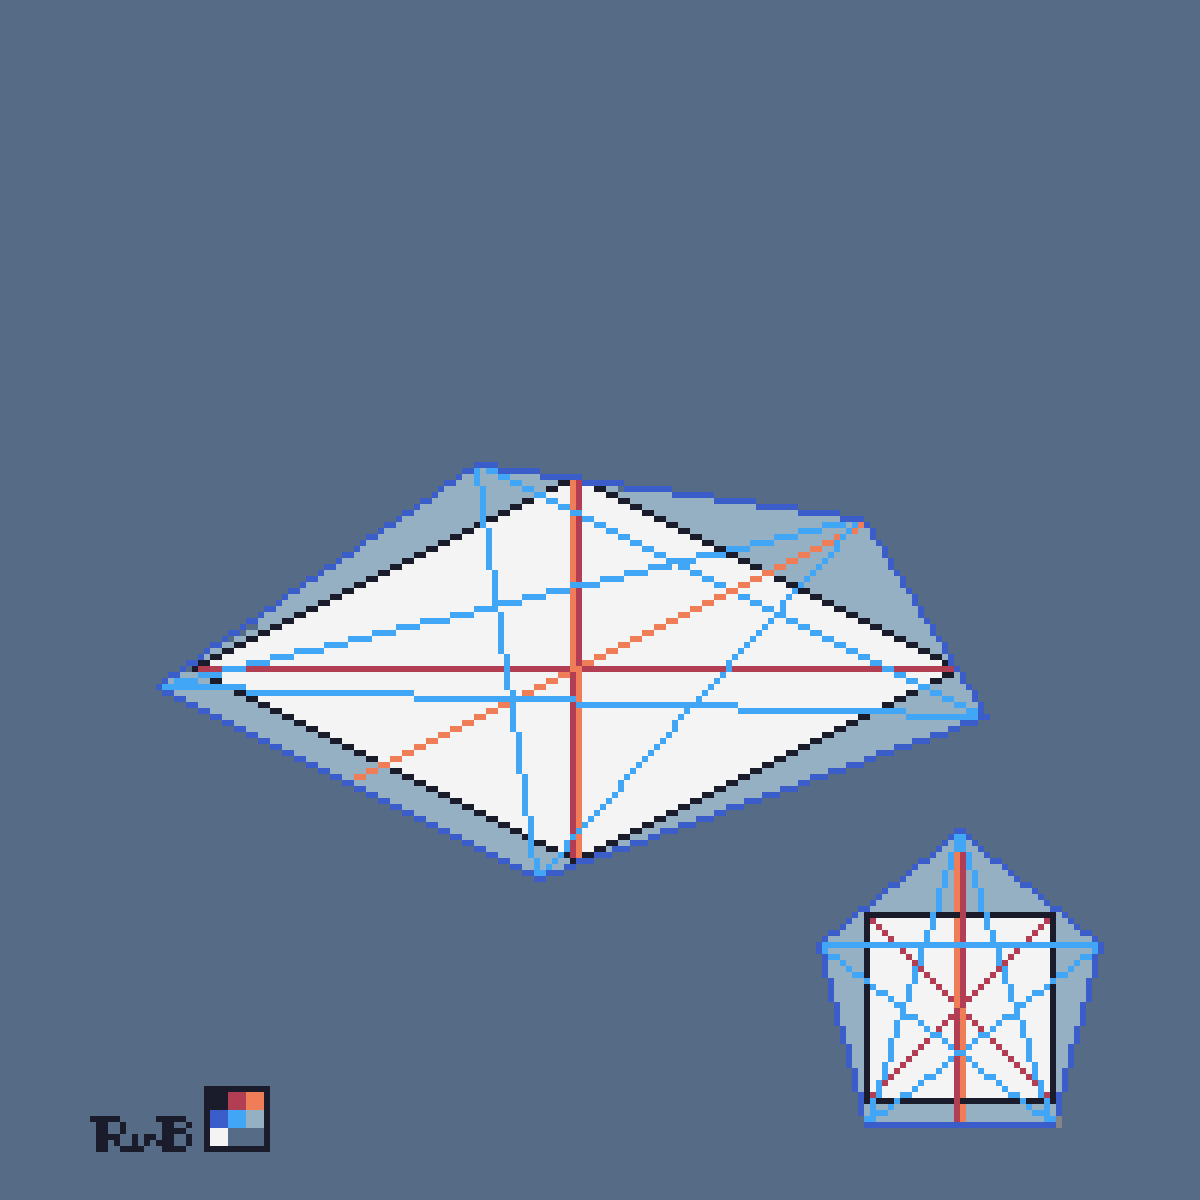 pixel art (200 by 200, 8 colors) of a square and a equal-sided pentagon in top view and in sheared (pixel art) isometric perspective